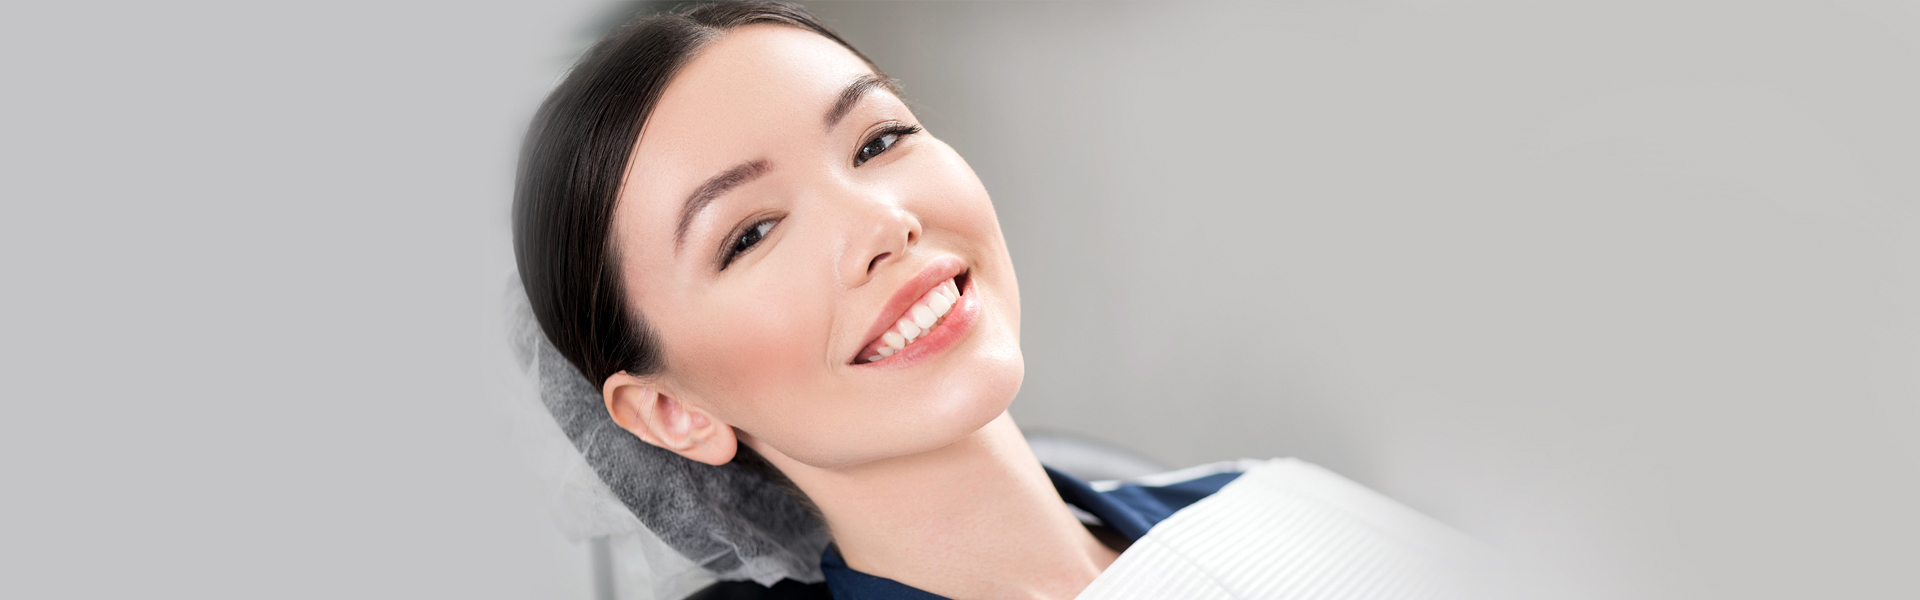 5 Benefits of Regular Dental Exams and Cleanings